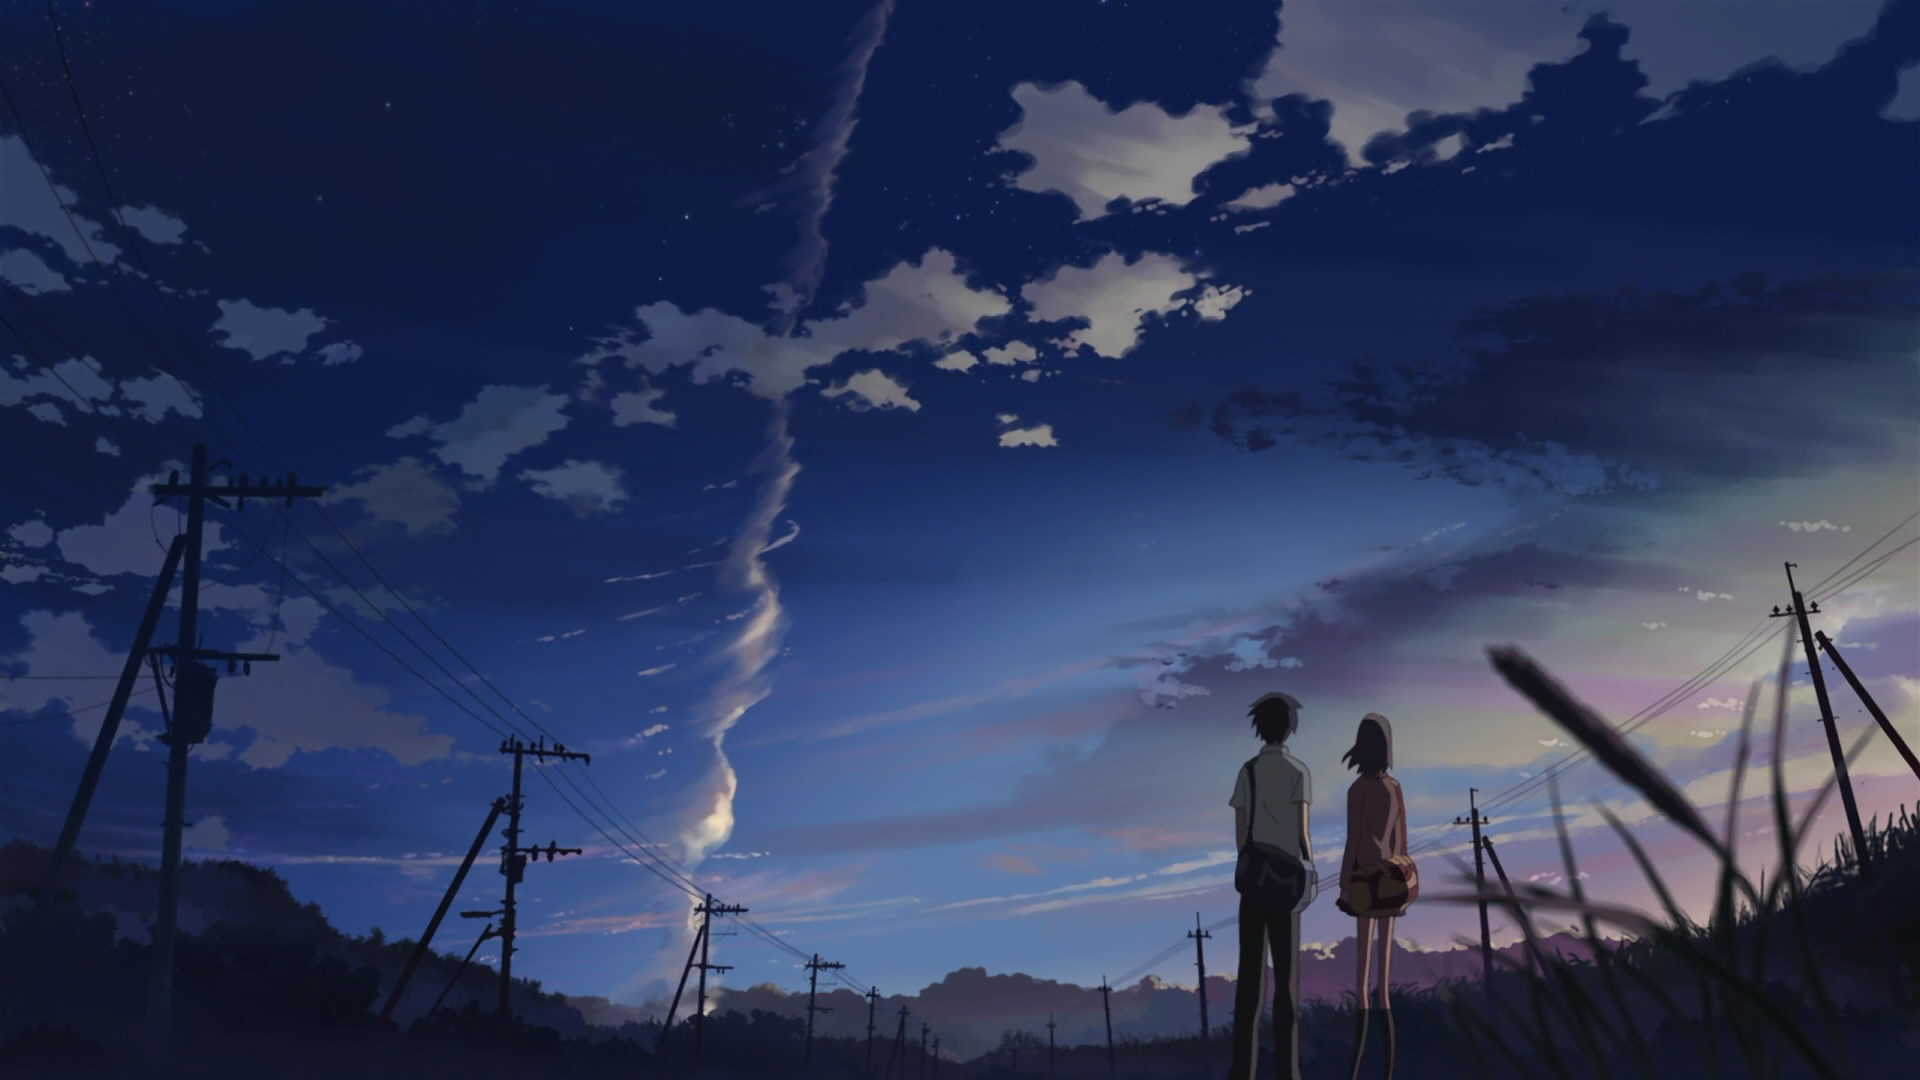 5 Centimeters Per Second #110950 | Full HD Widescreen wallpapers ...